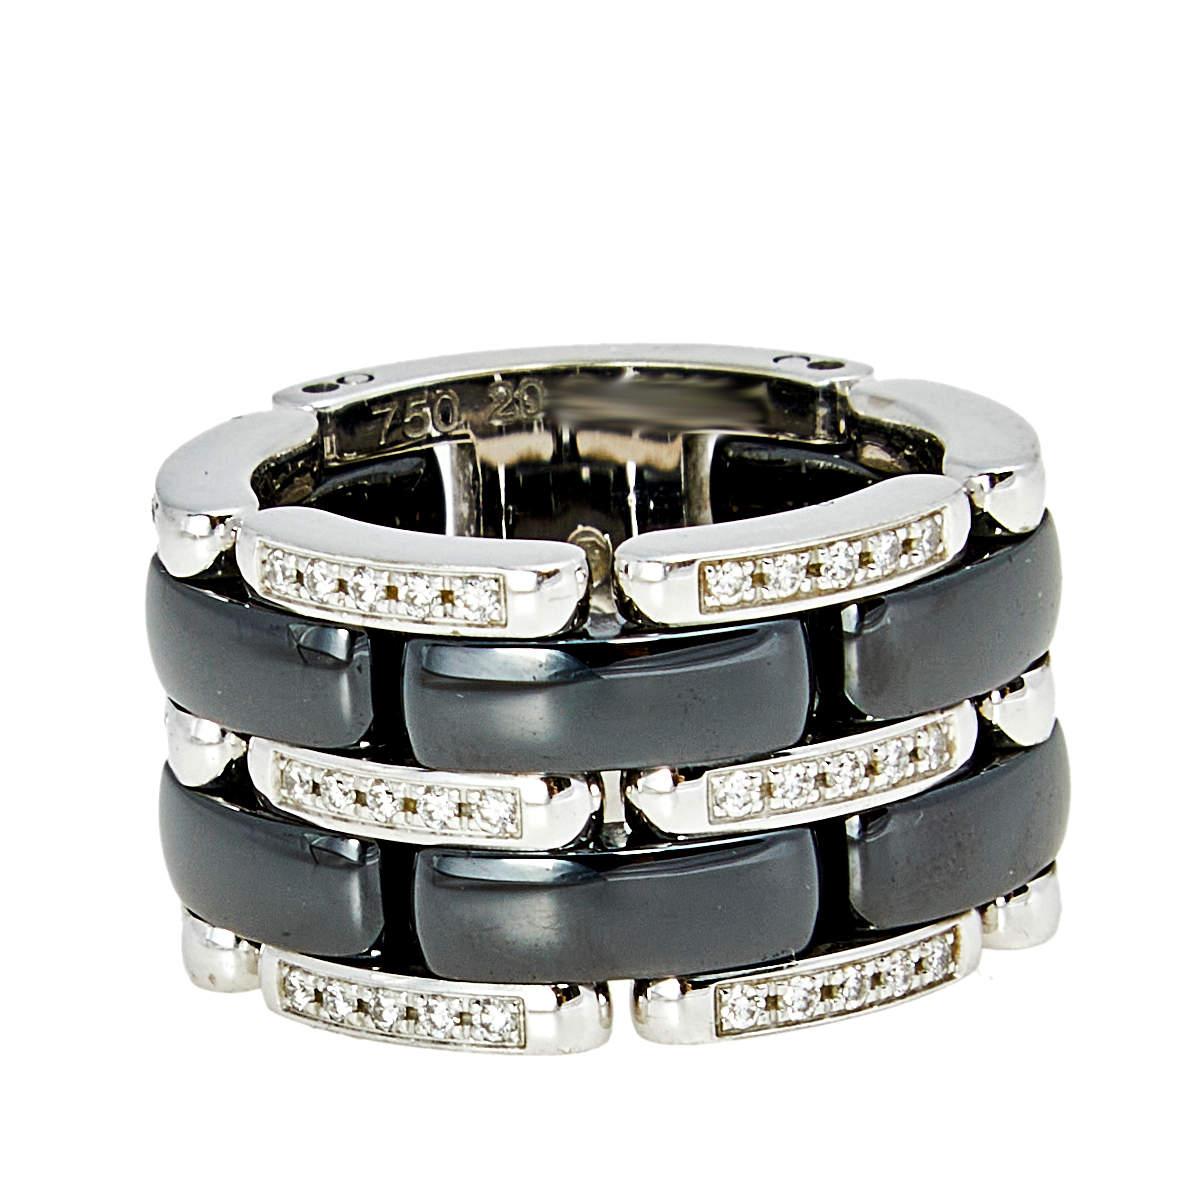 Part of the Ultra collection, this wide Chanel ring will make a bold statement. Made from 18k white gold, its chain-like design combines black ceramic and diamonds to create a monochrome shine. This ring has an engraved Chanel logo on the back.

